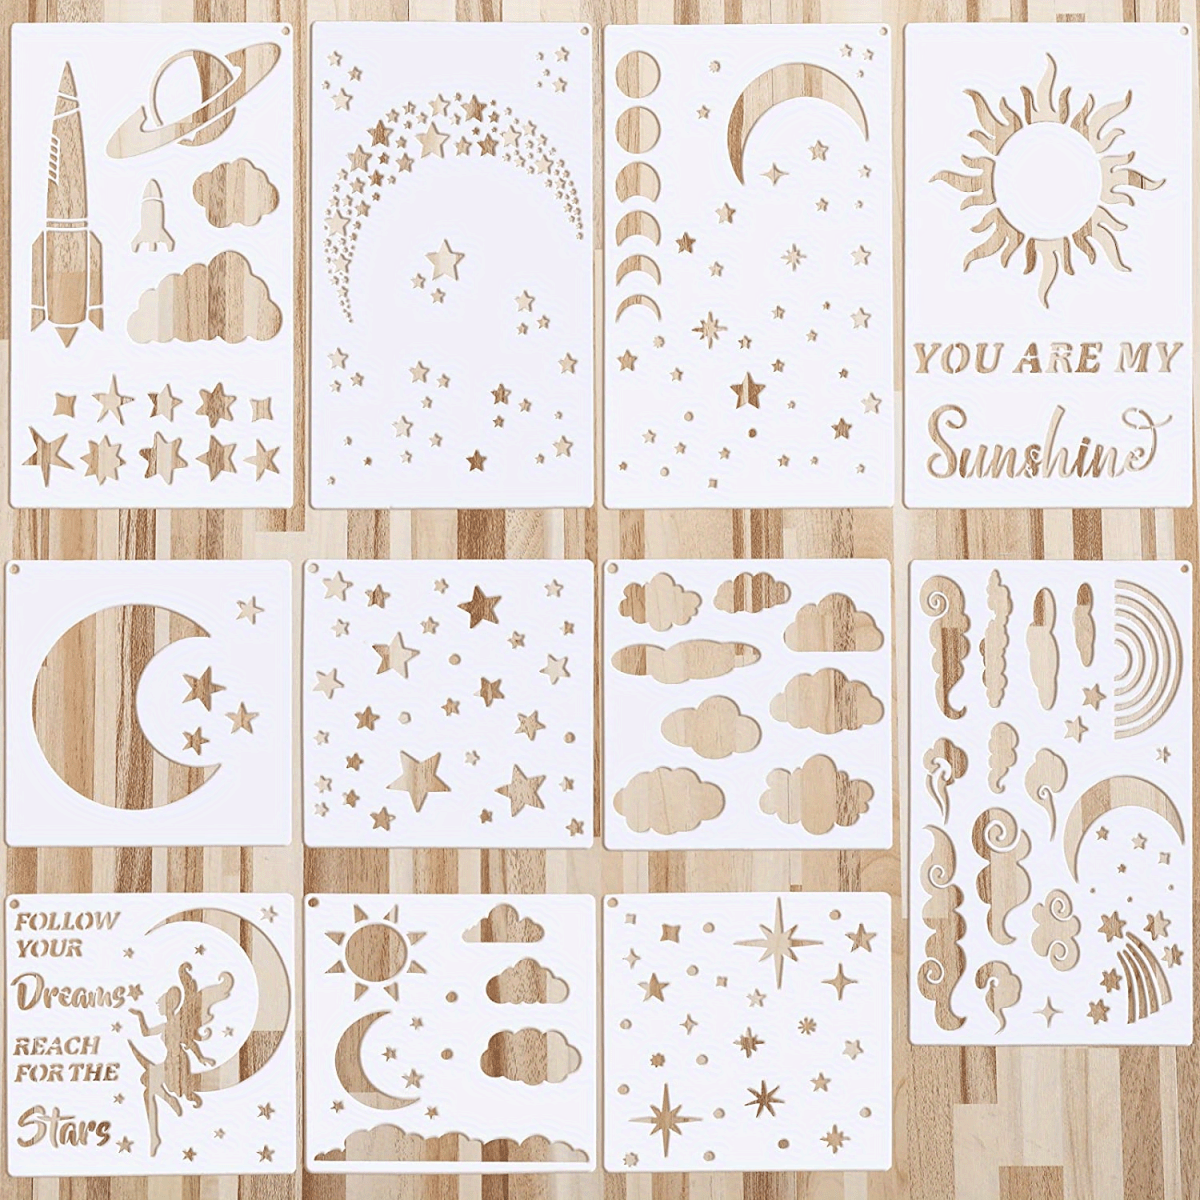 Painting Template Portable Star Stencil Reusable Printing Plastic